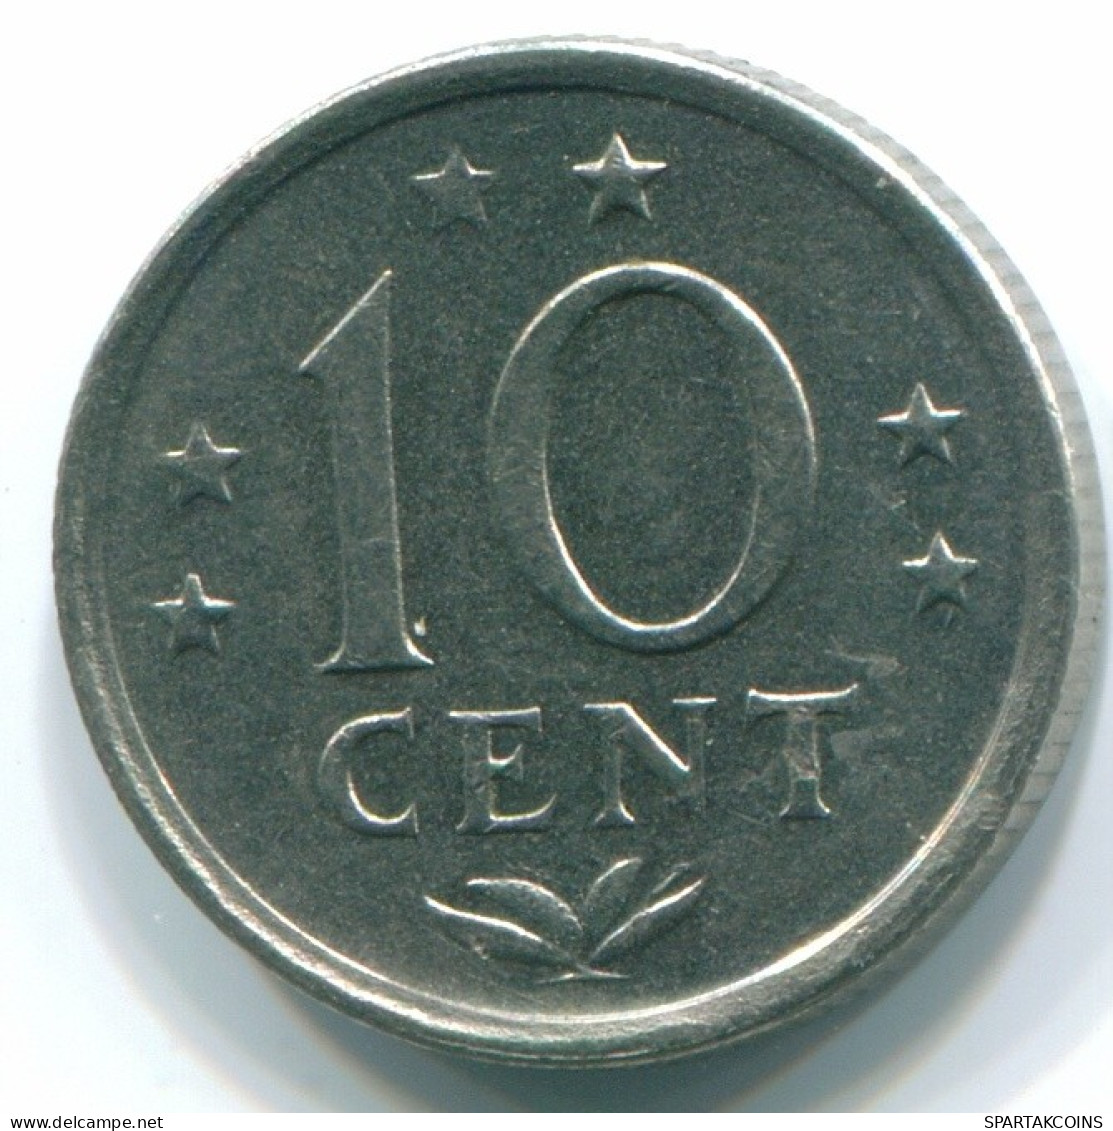 10 CENTS 1970 NETHERLANDS ANTILLES Nickel Colonial Coin #S13371.U.A - Netherlands Antilles